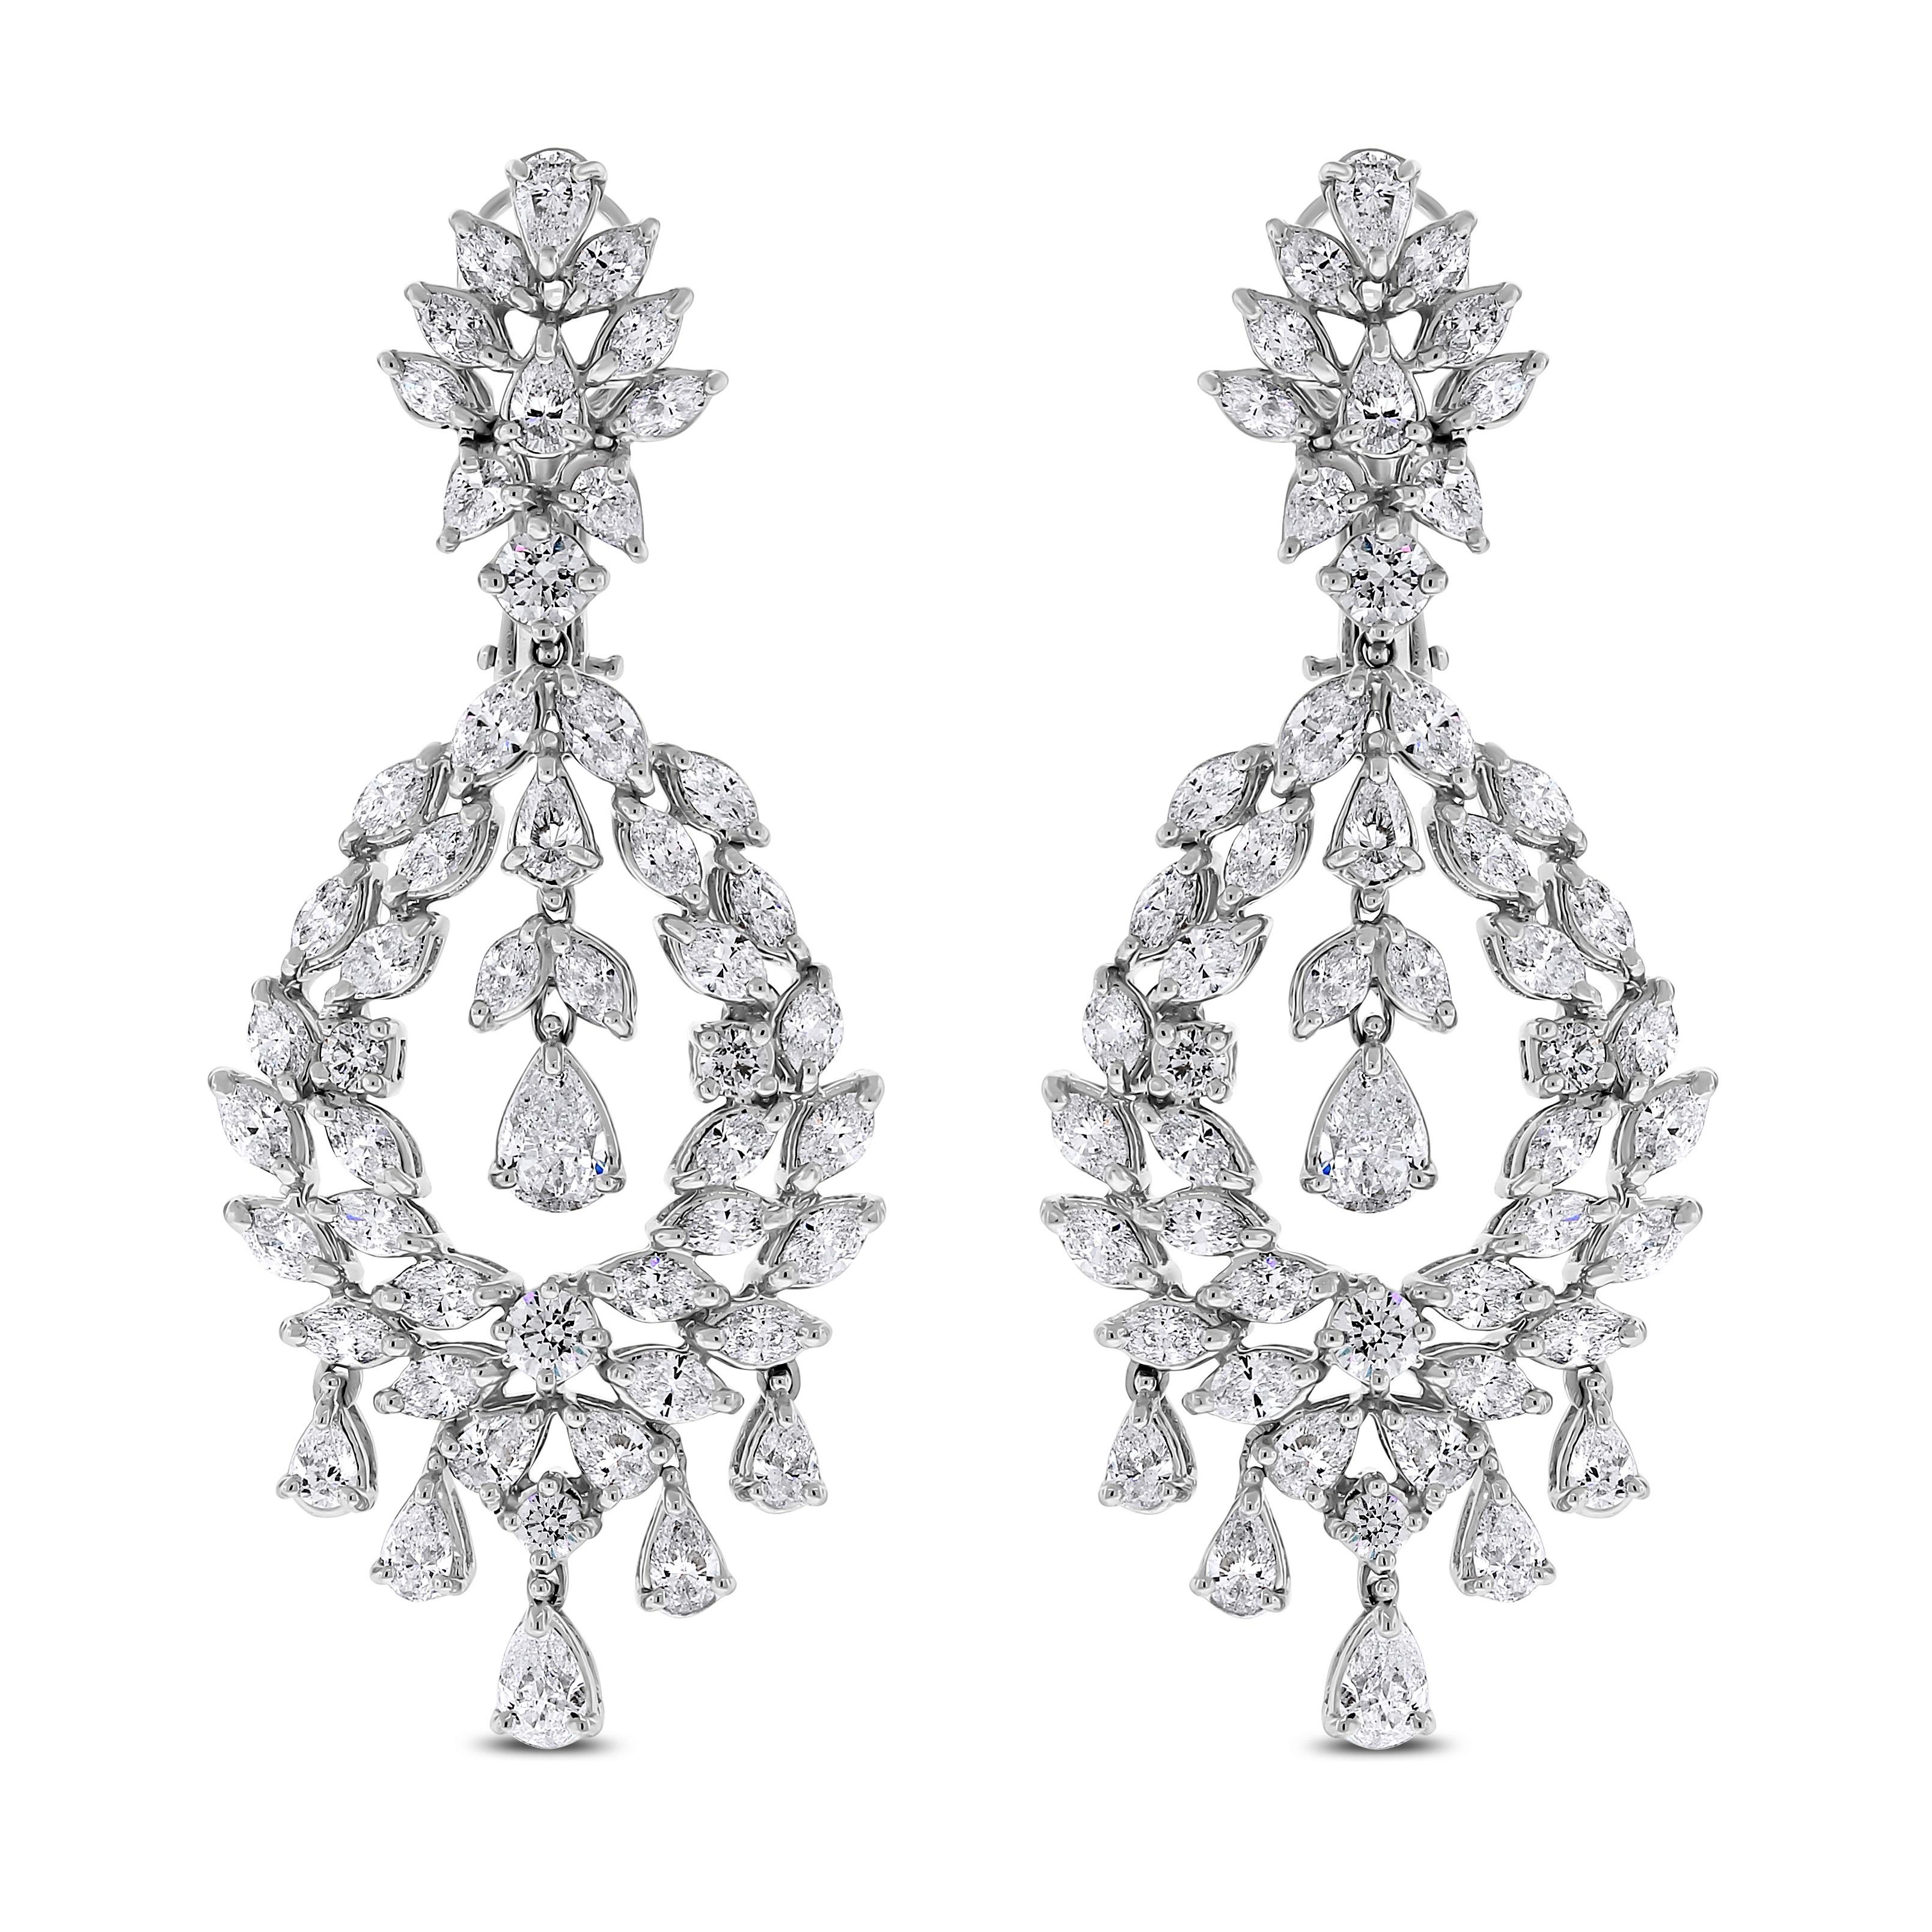 With timeless design and dazzling diamonds, these earrings are a showstopper. 

Diamonds Shapes: Round, Marquise & Pear
Total Diamond Weight: 11.18 ct 
Diamond Color: G - H
Diamond Clarity: VS (Very Slightly Included) 

Metal: 18K White Gold 
Metal